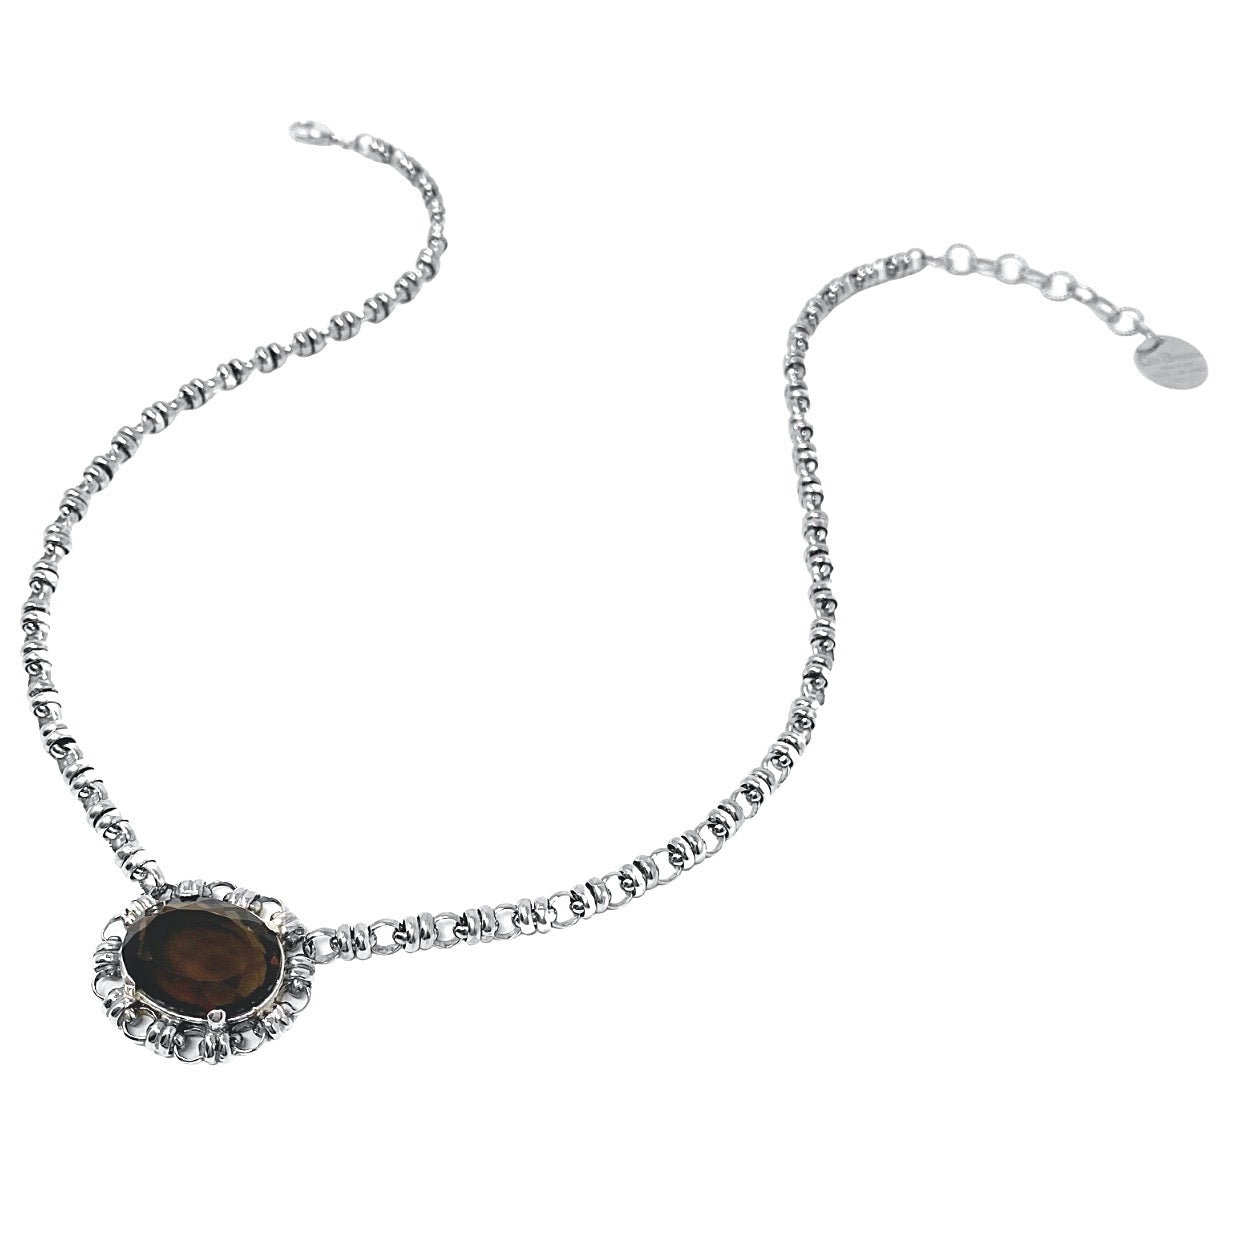 Megani Necklace in Silver with Smoky Quartz